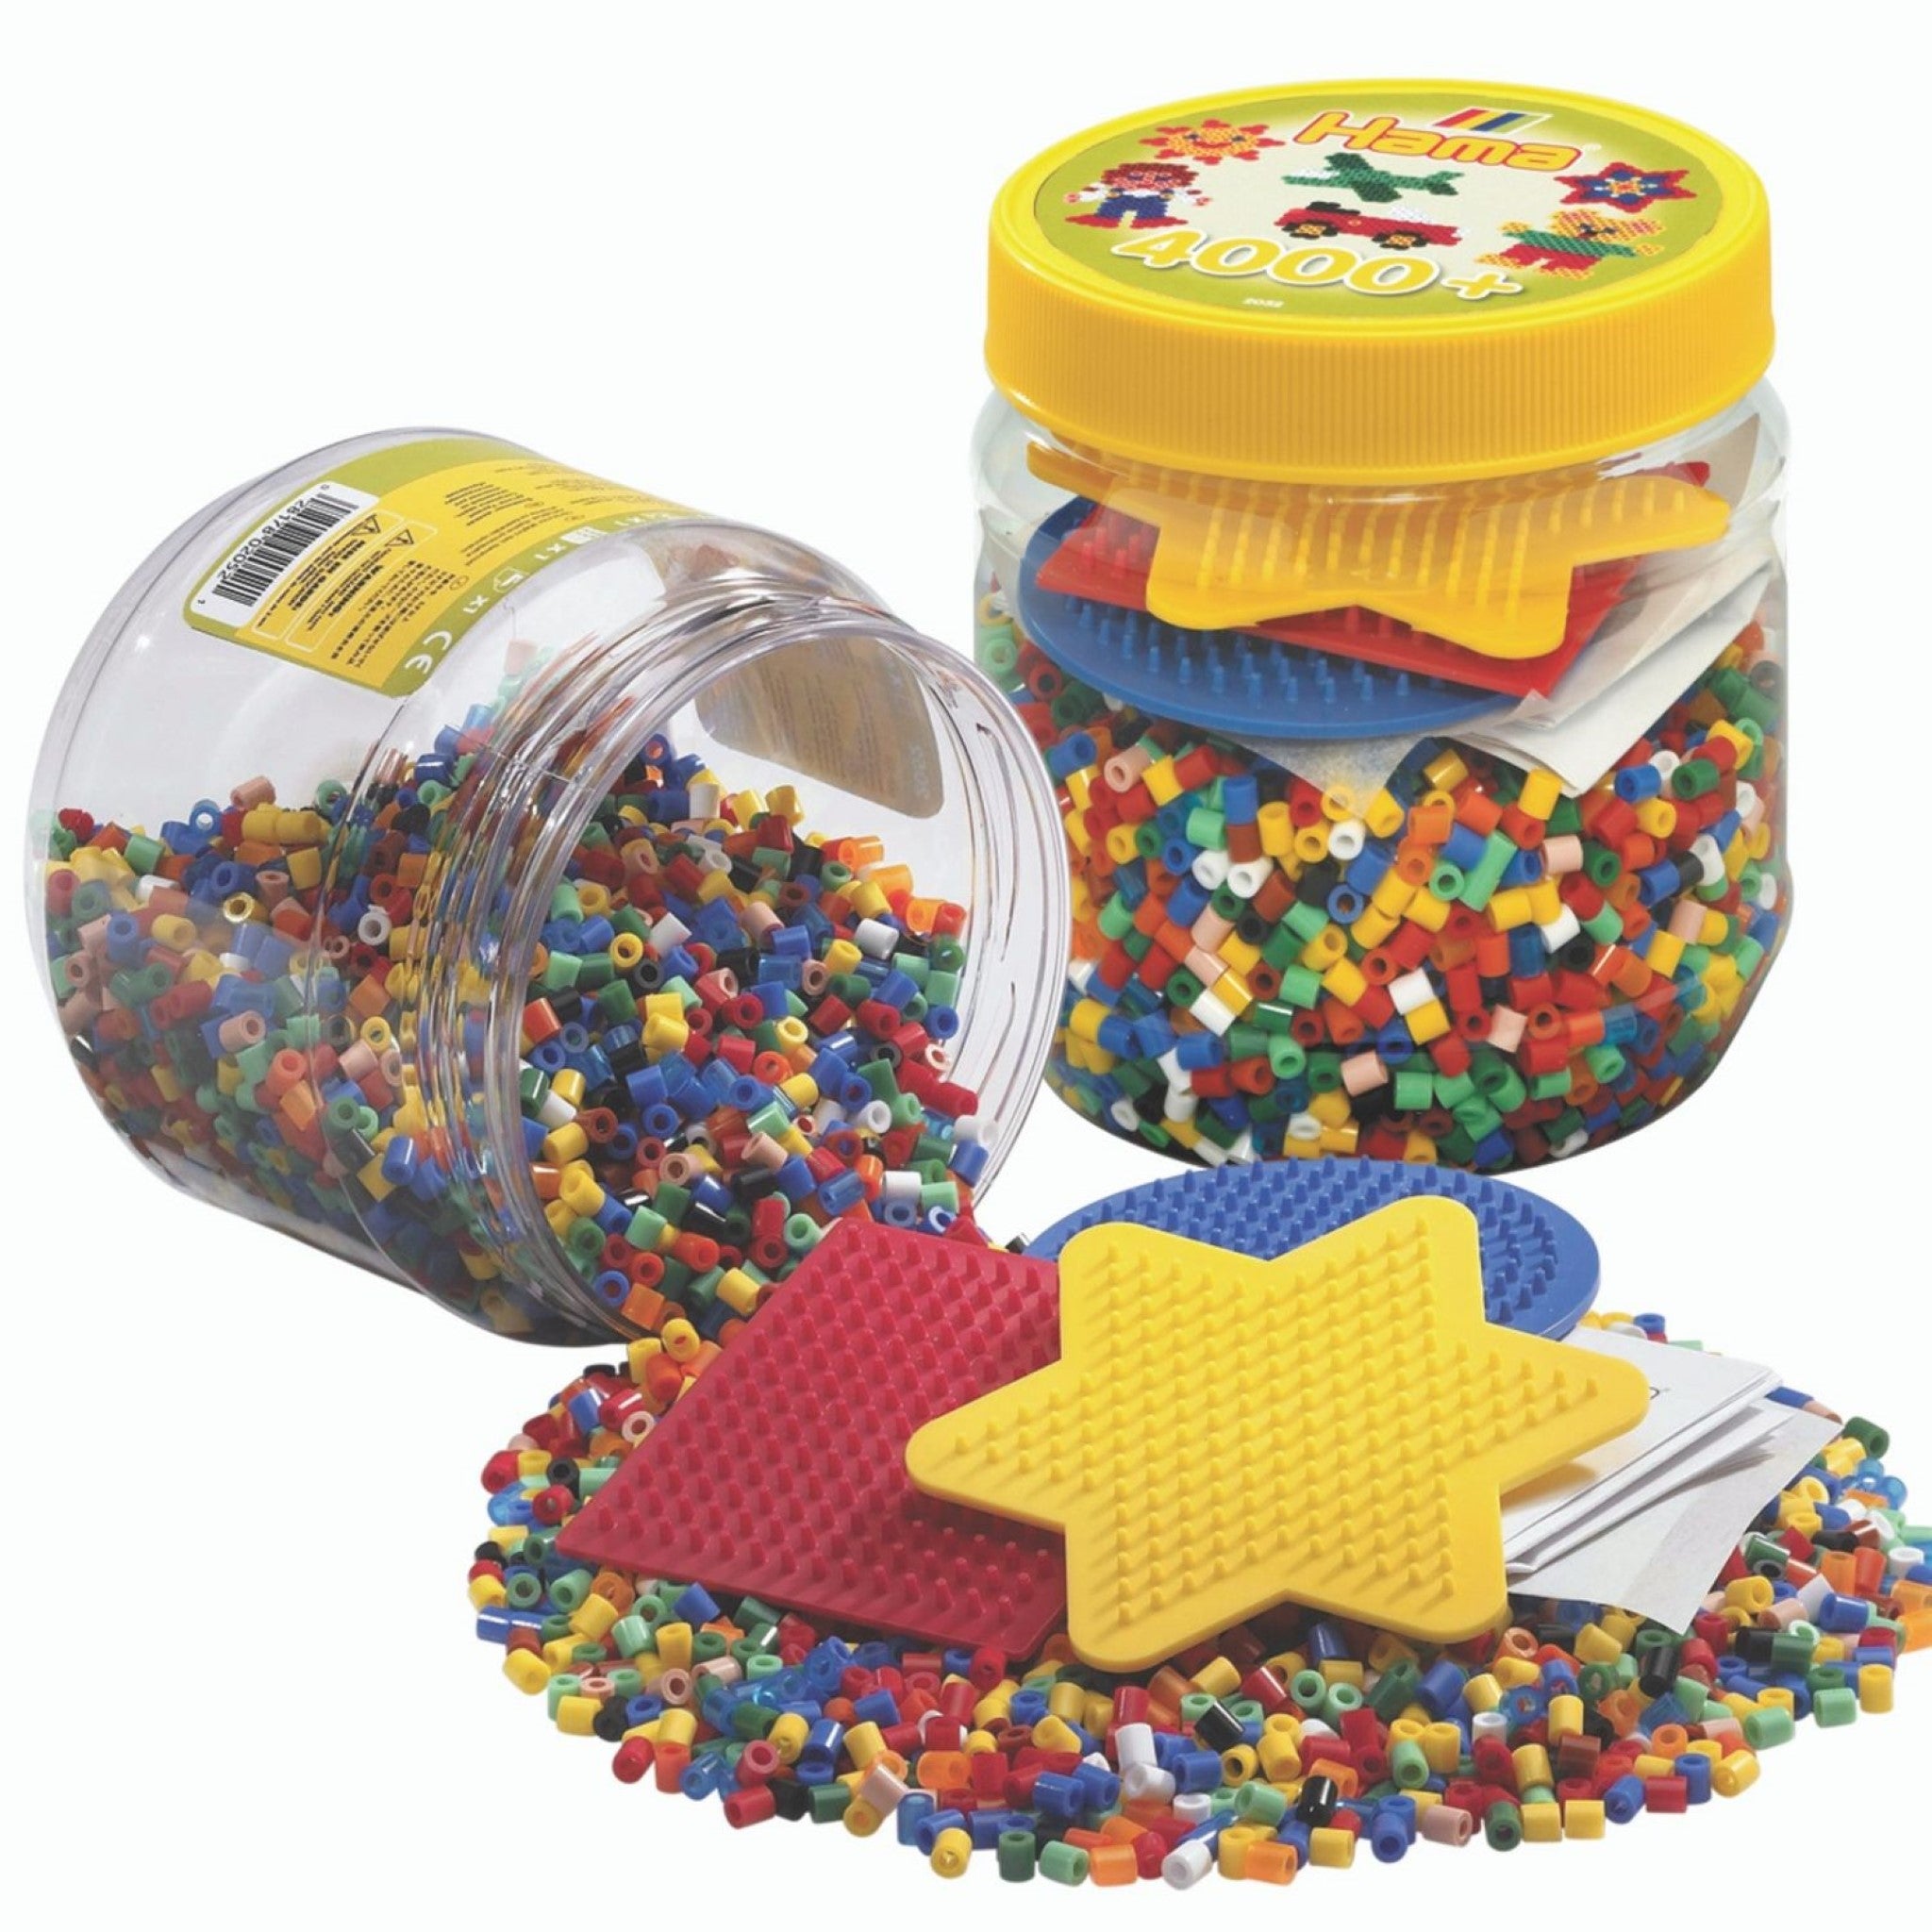 Hama Beads - Tub With Beads & Pegboards